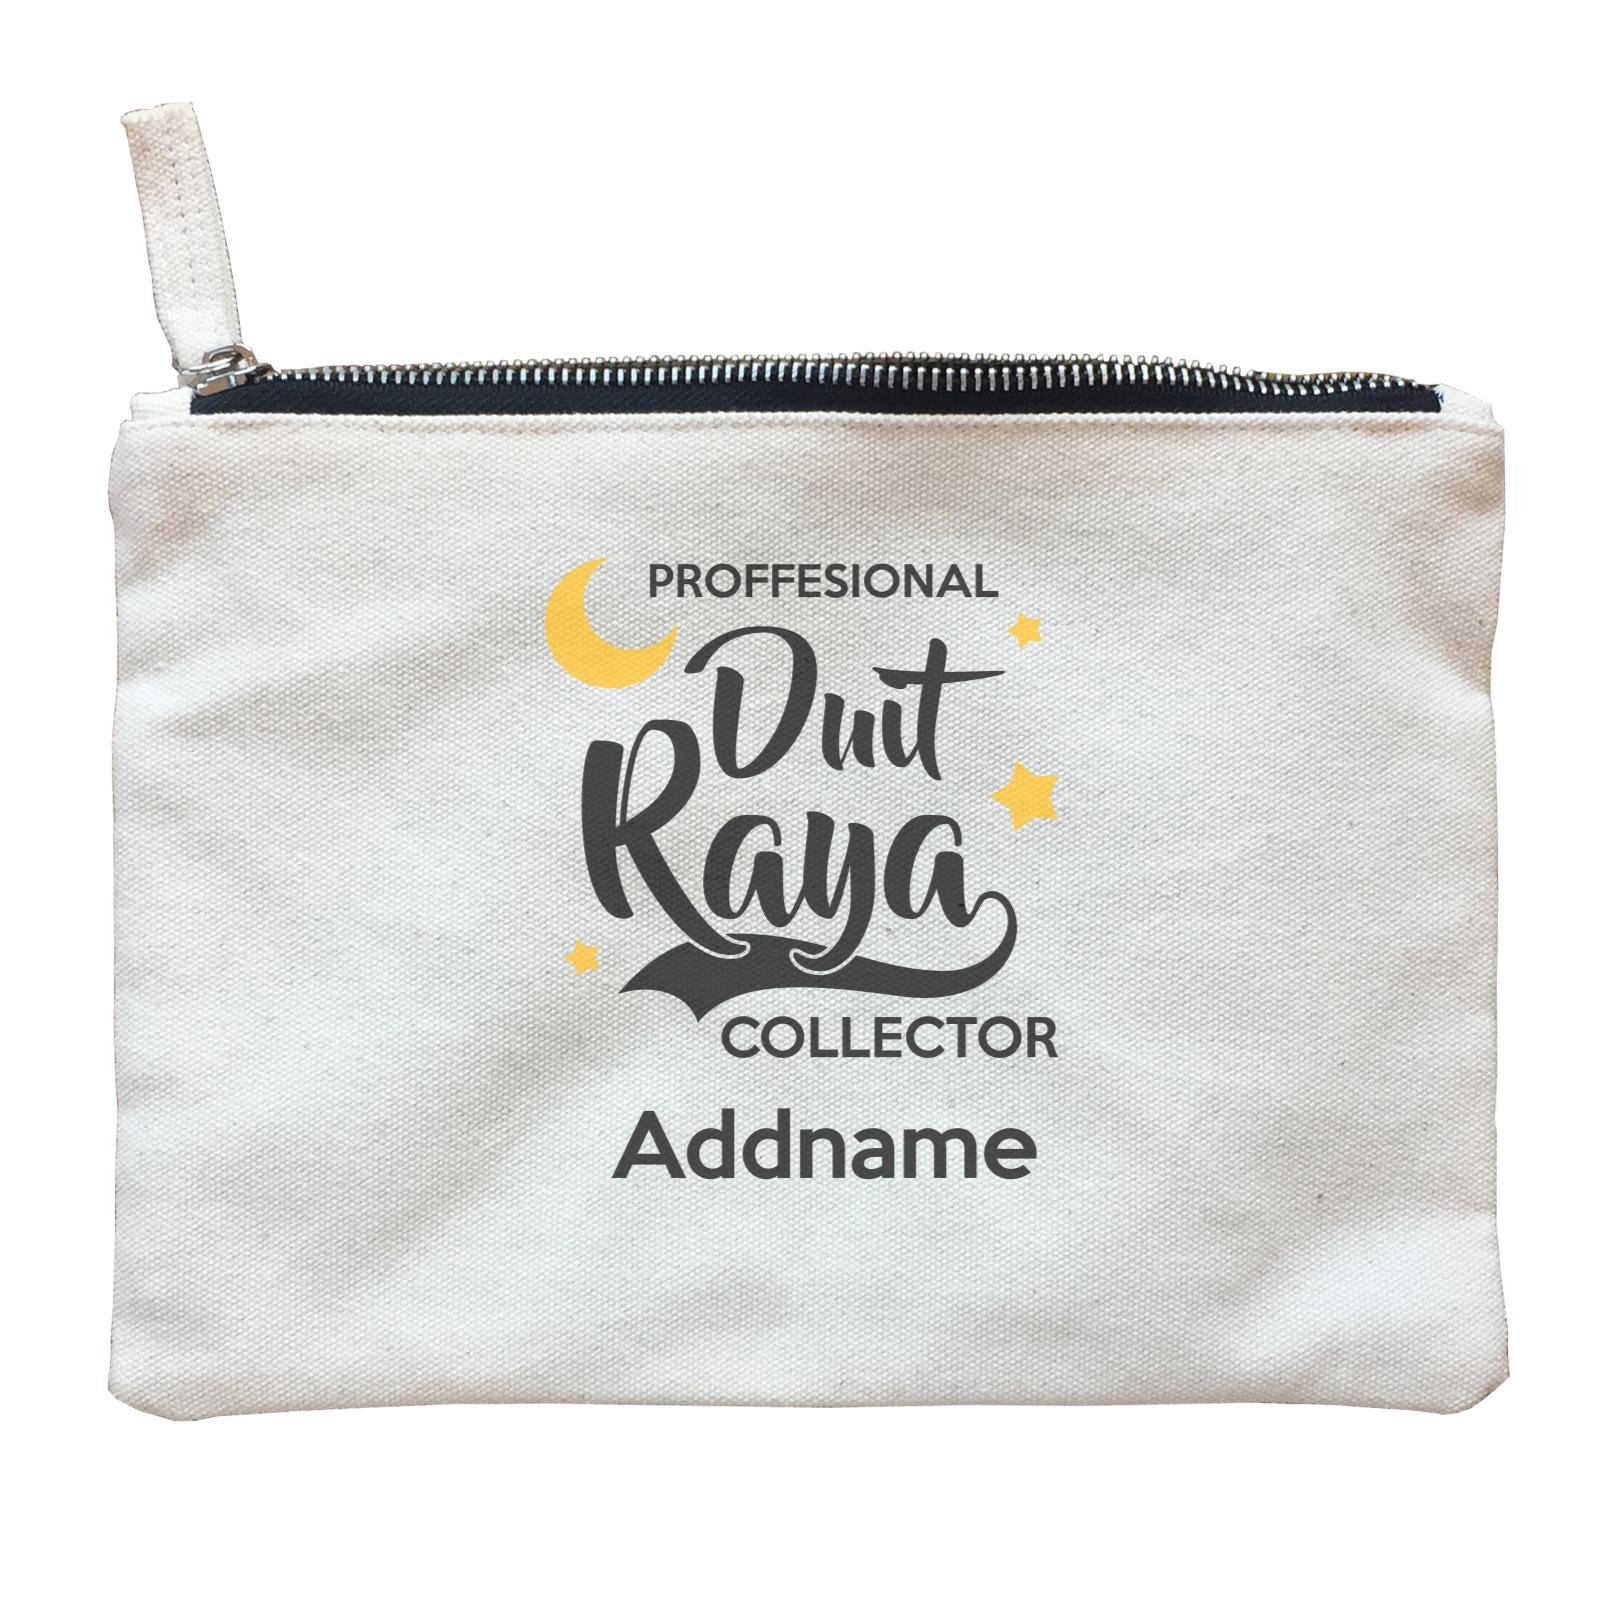 Raya Typography Professional Duit Raya Collector Addname Zipper Pouch